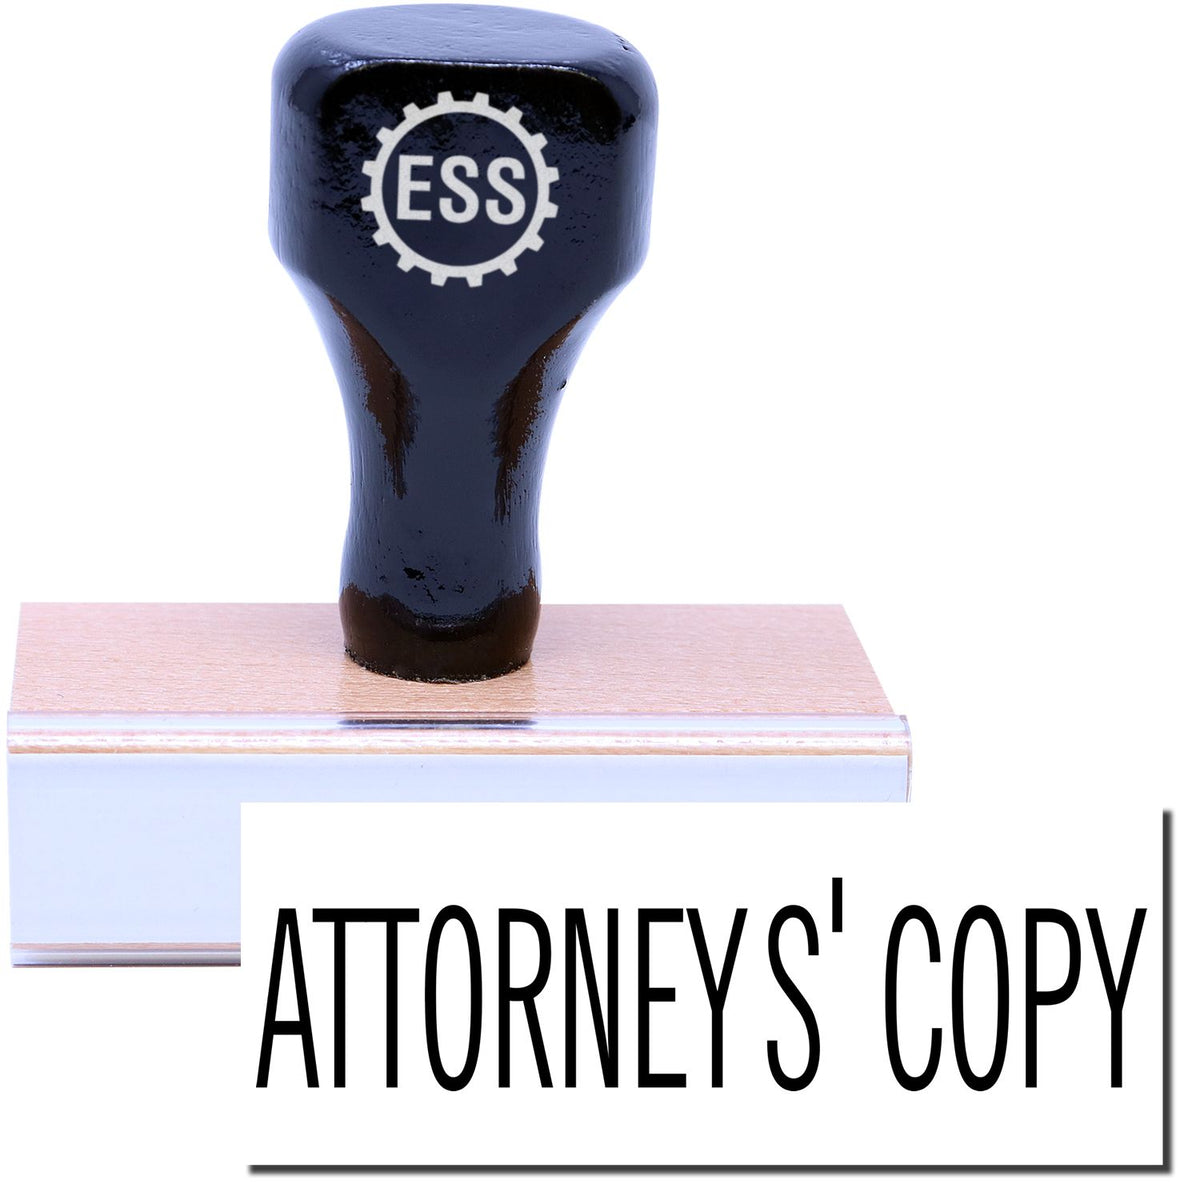 A stock office rubber stamp with a stamped image showing how the text &quot;ATTORNEYS&#39; COPY&quot; in a large font is displayed after stamping.